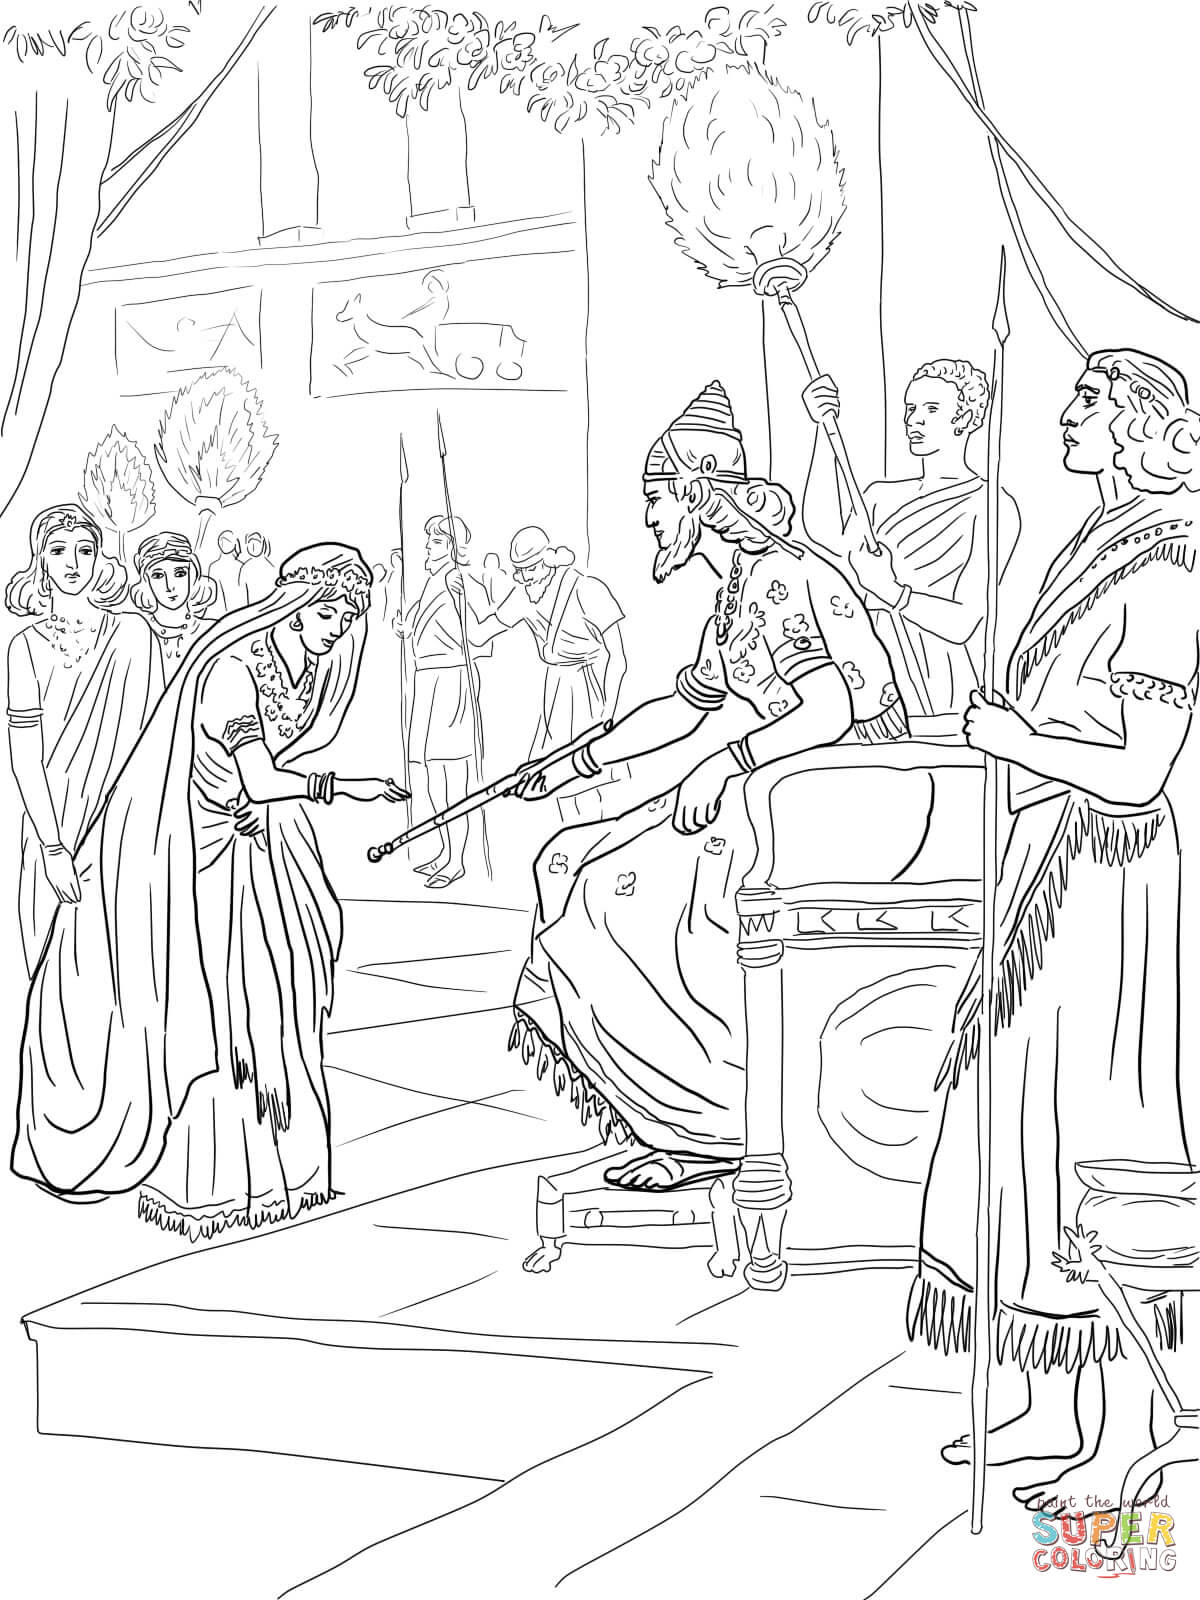 Esther and king xerxes coloring page free printable coloring pages